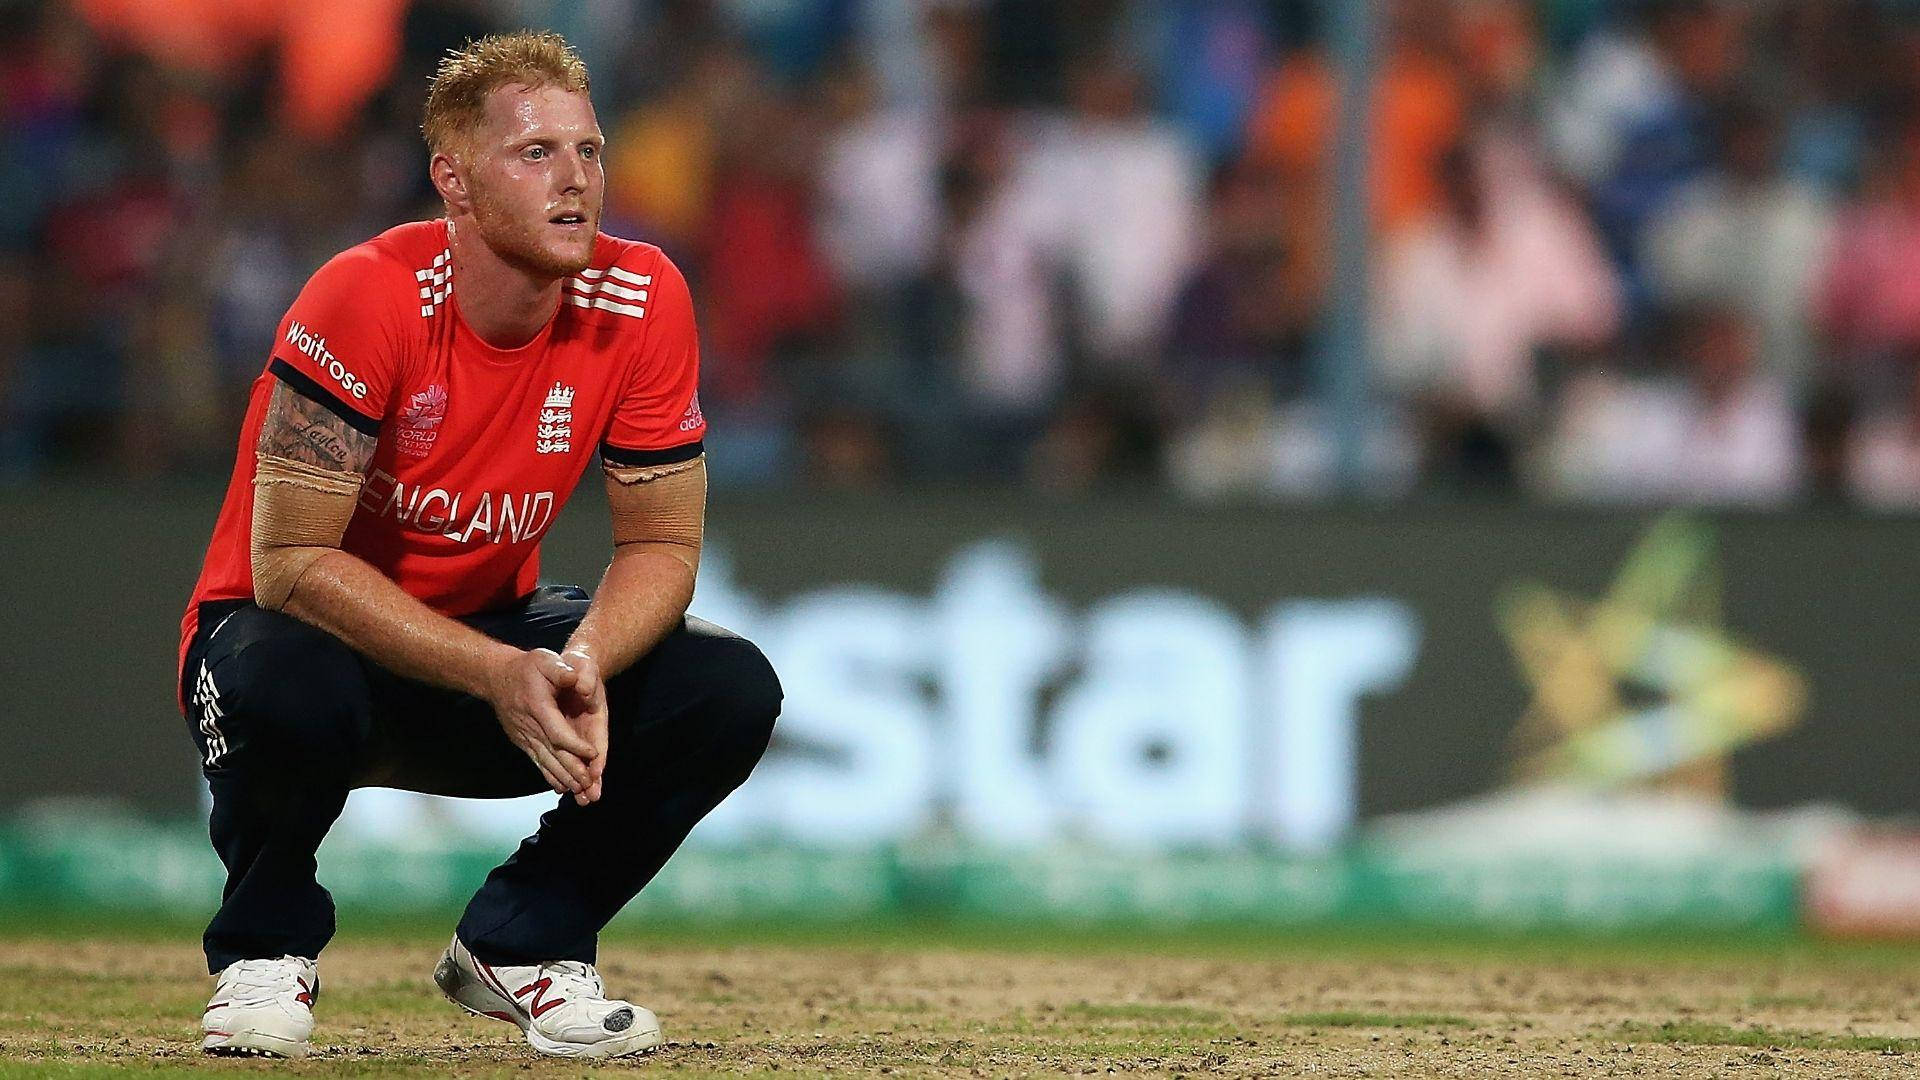 Ben Stokes Resting On The Field